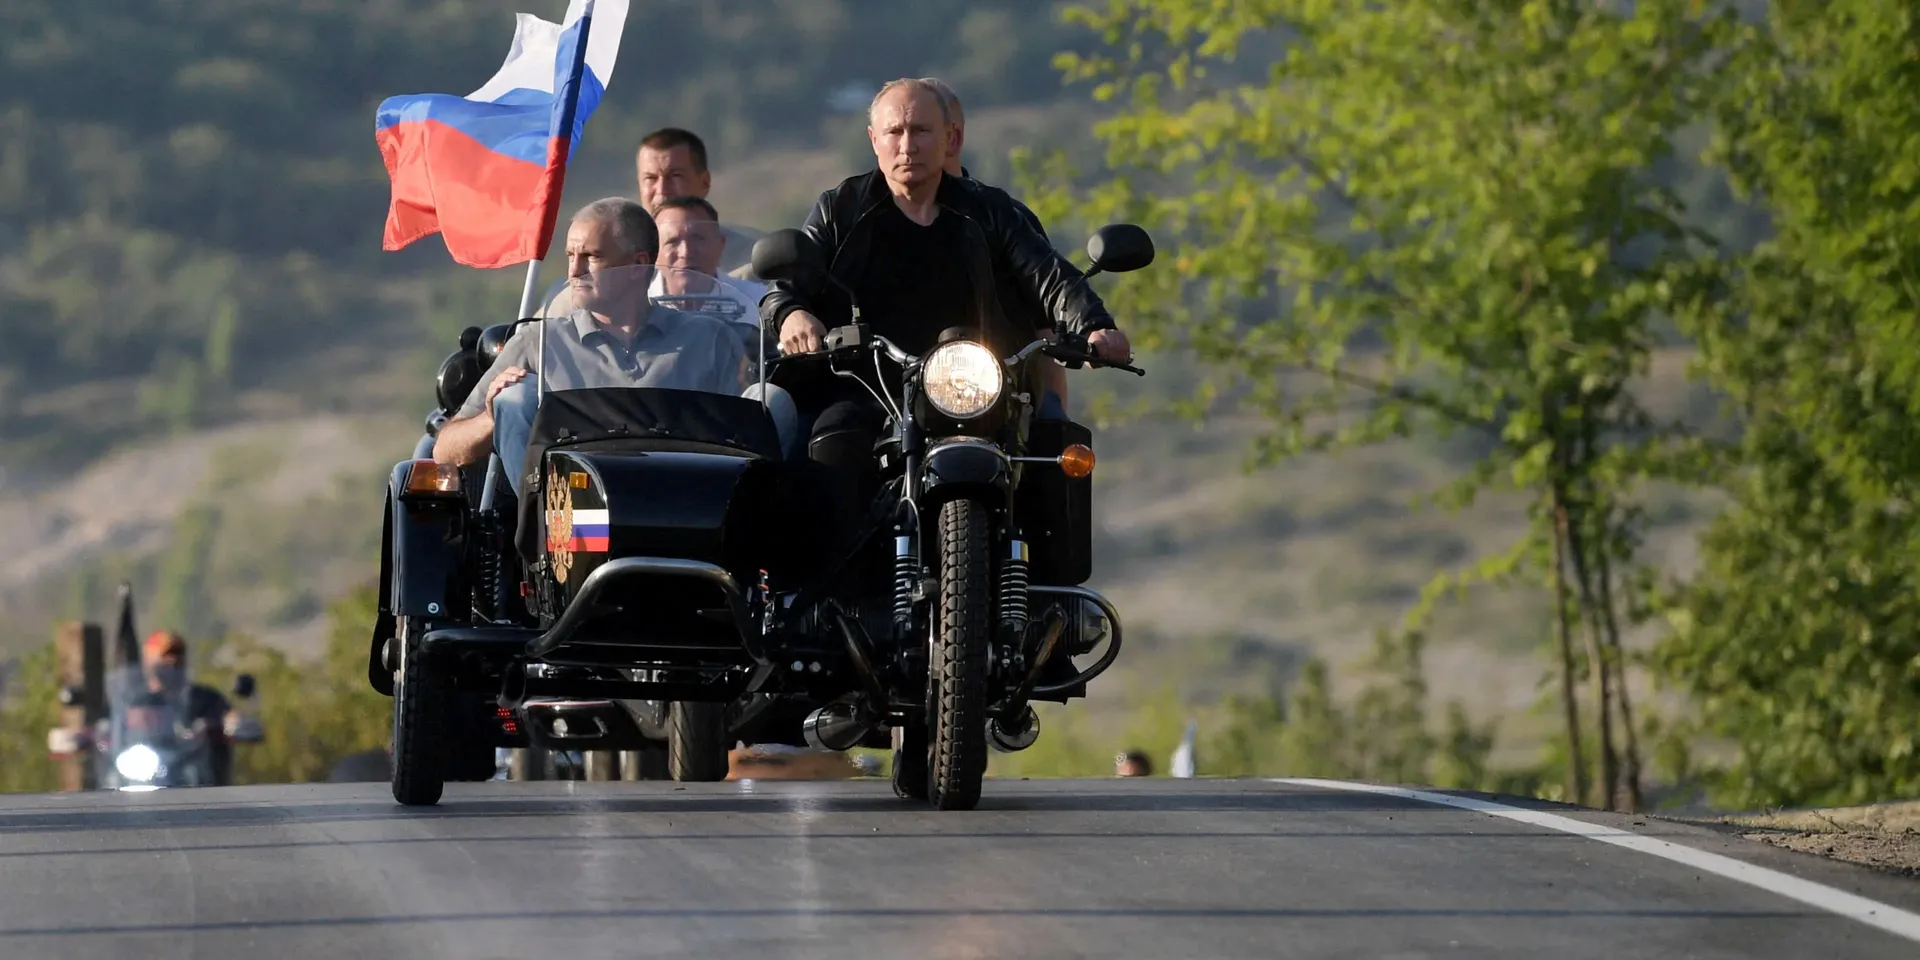 How Putin's Friends “Bought Out” Occupied Crimea